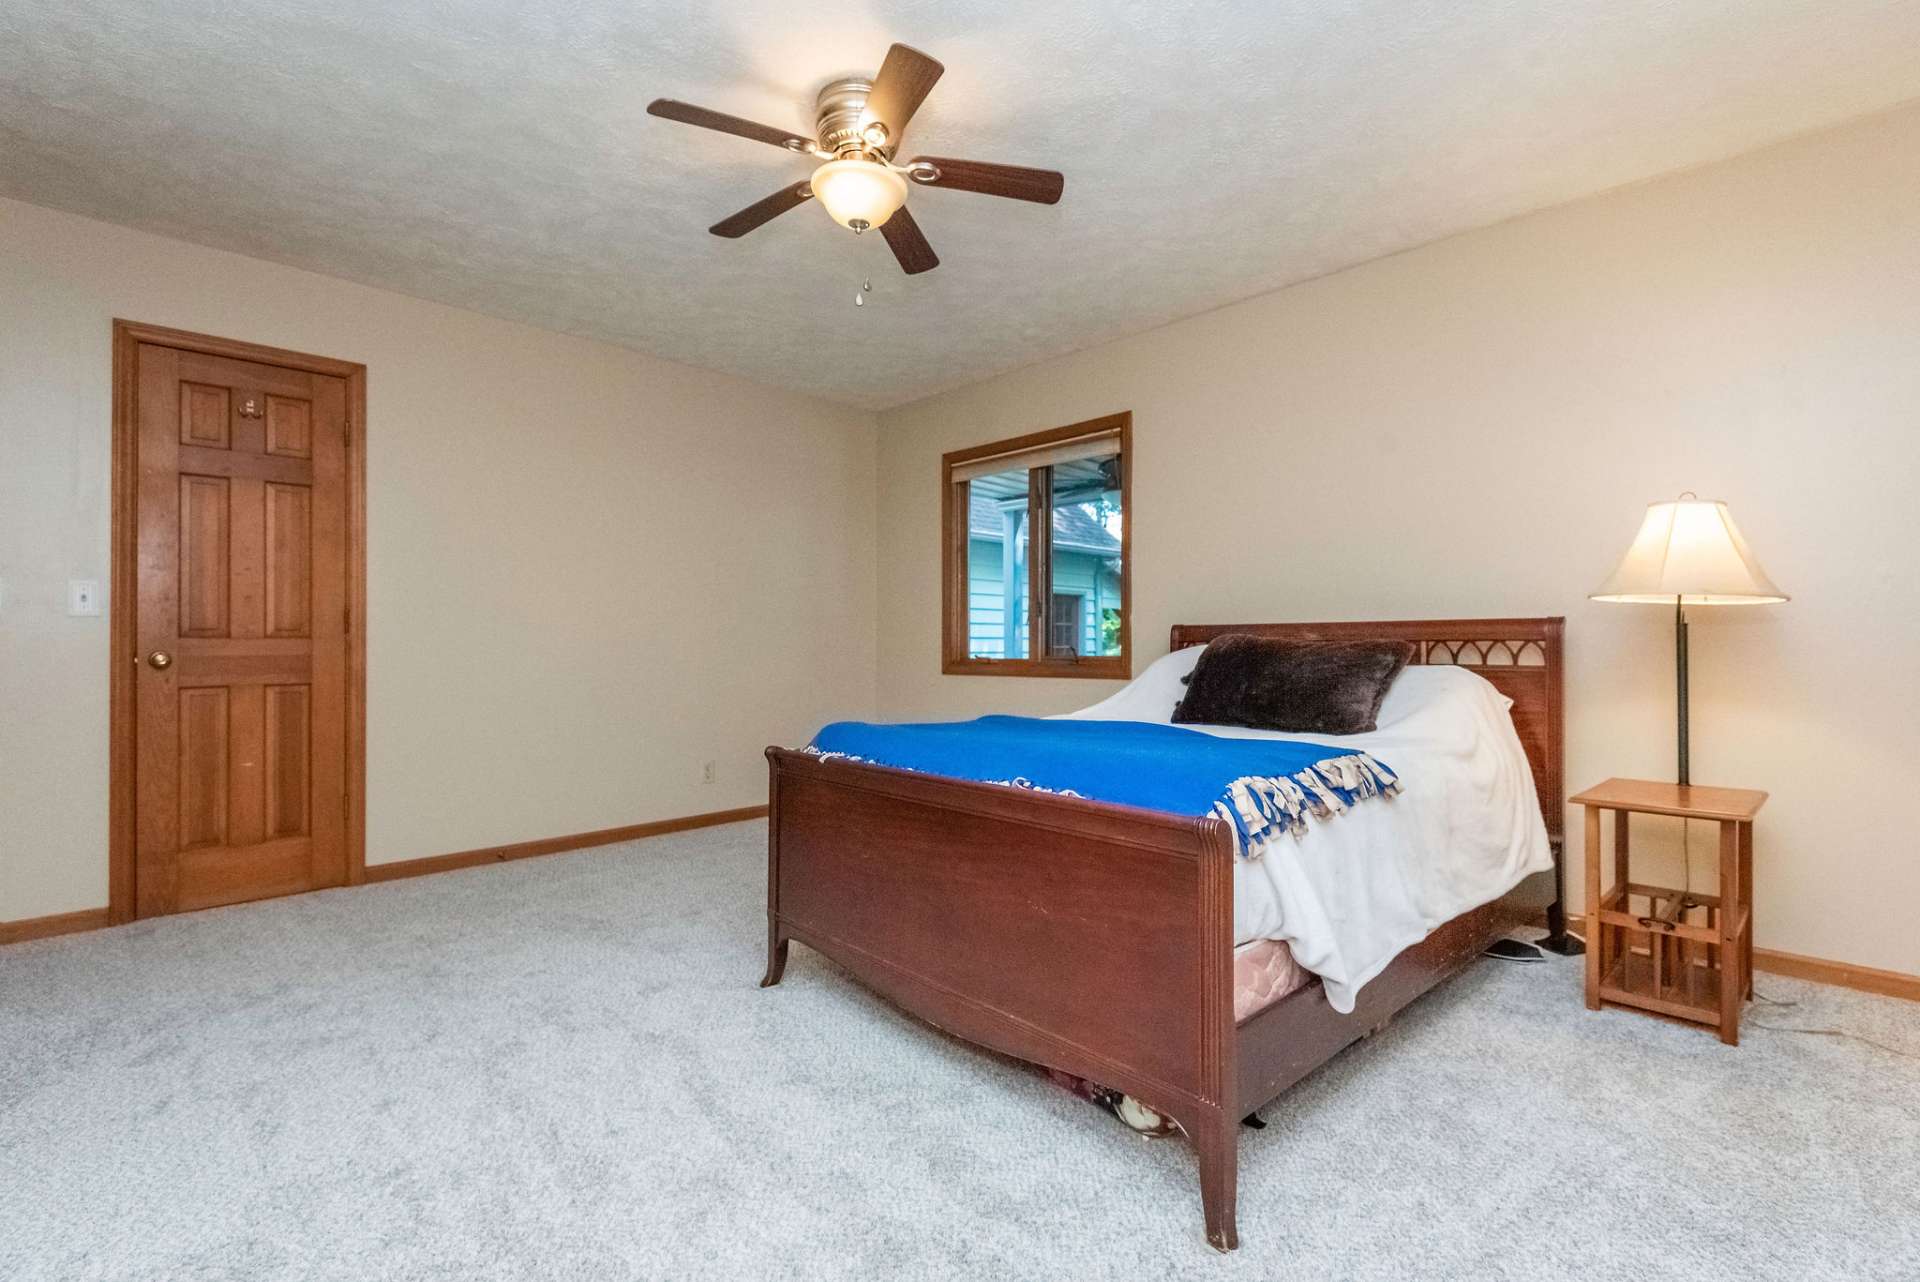 This bedroom could also serve as a main level master.